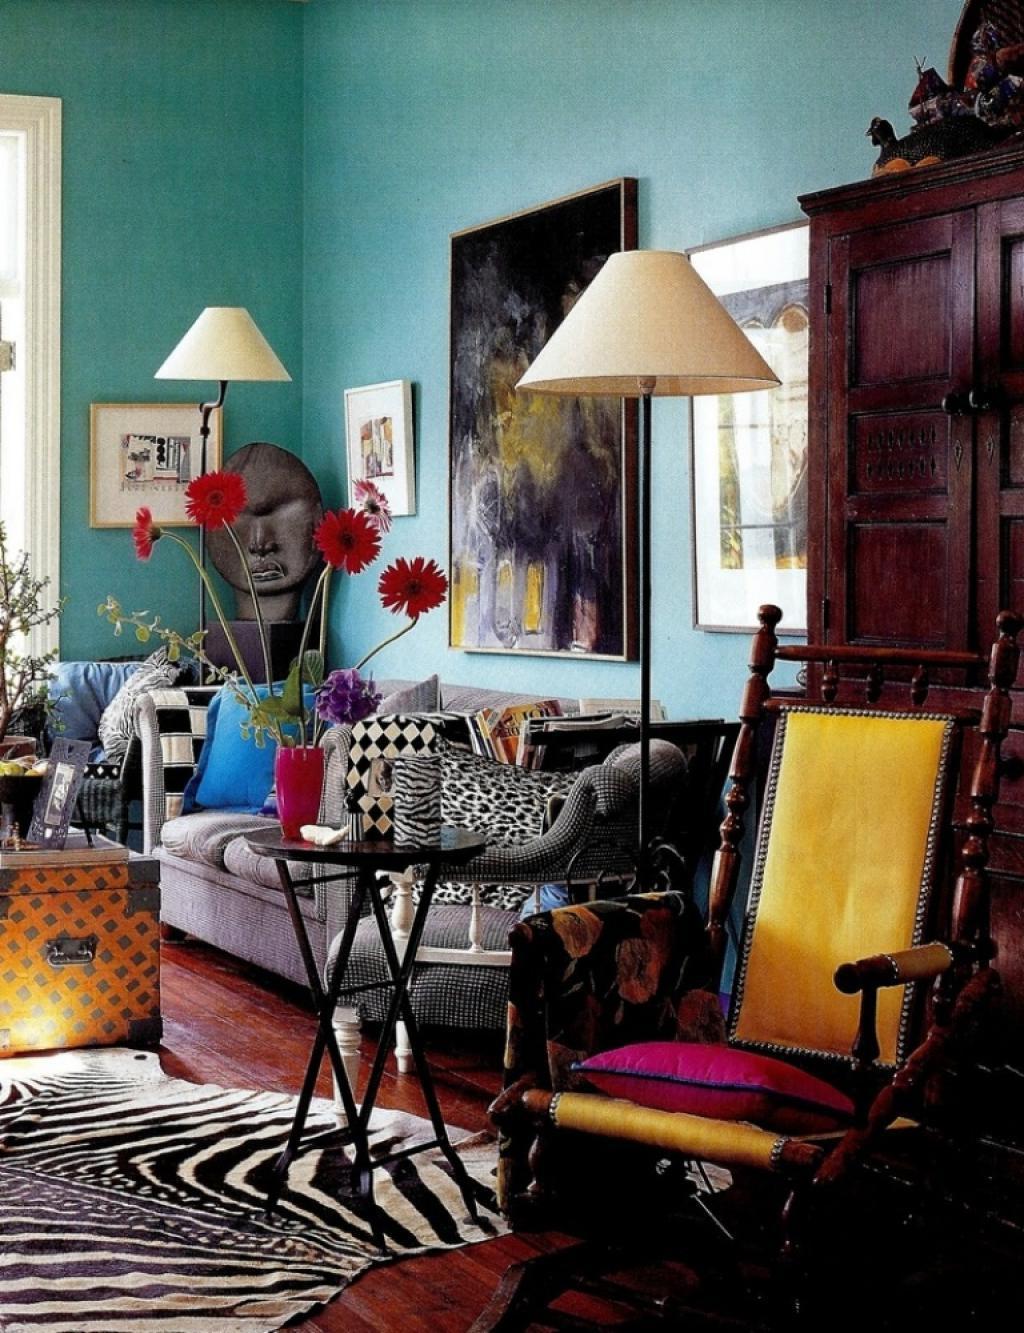 Eclectic decor: blending antique and modern items - Interior Design